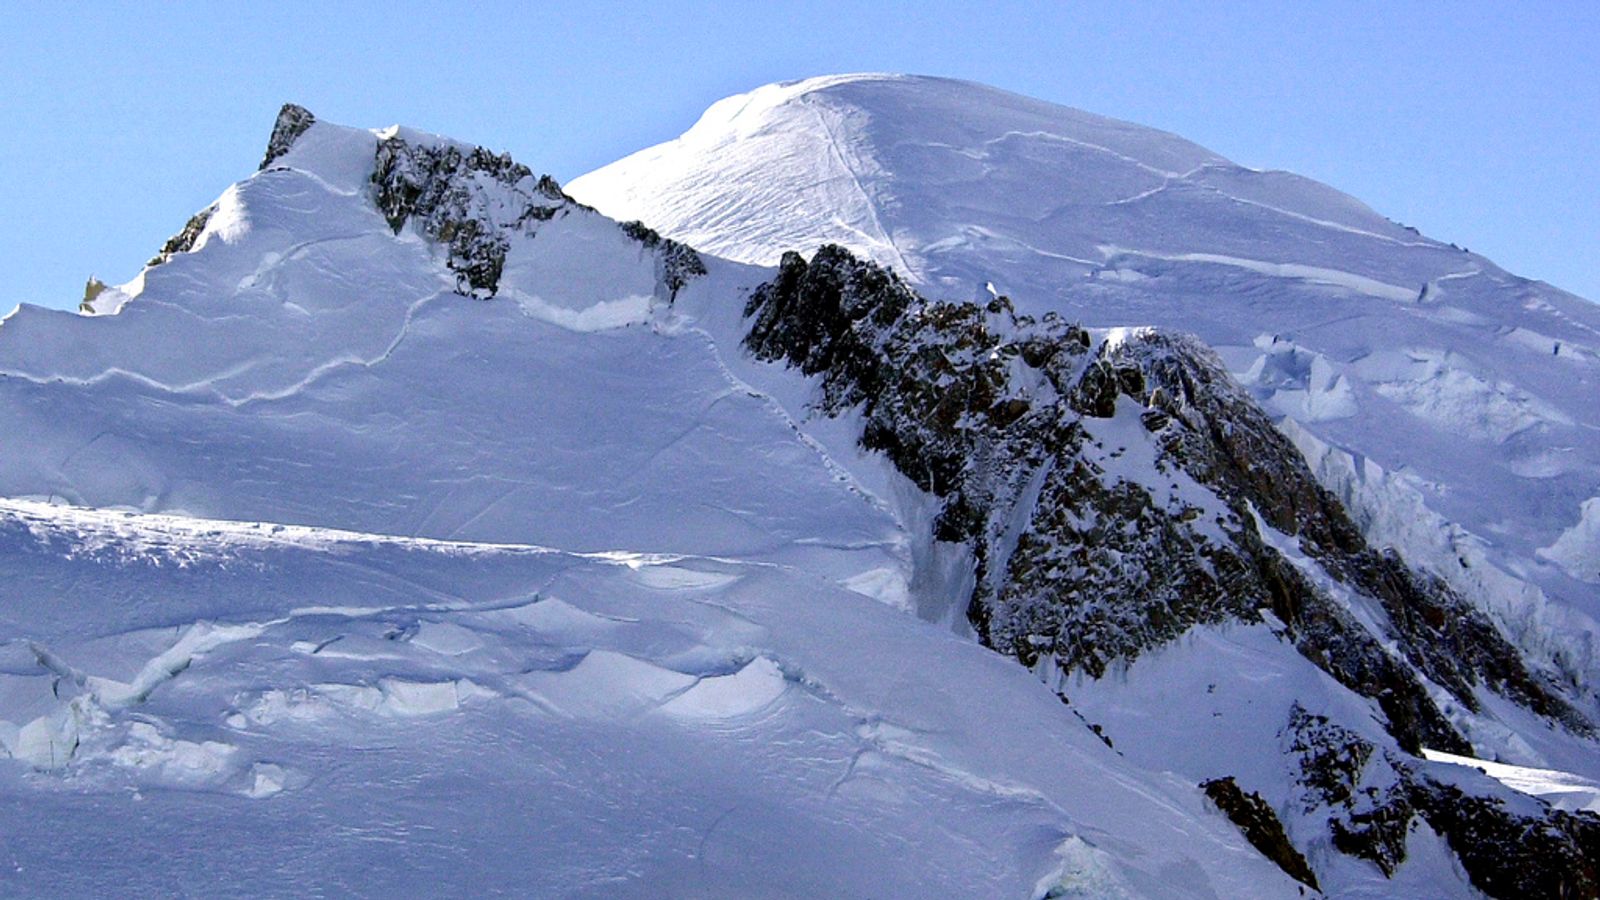 Avalanche kills British mother and son skiing on Mont Blanc in France